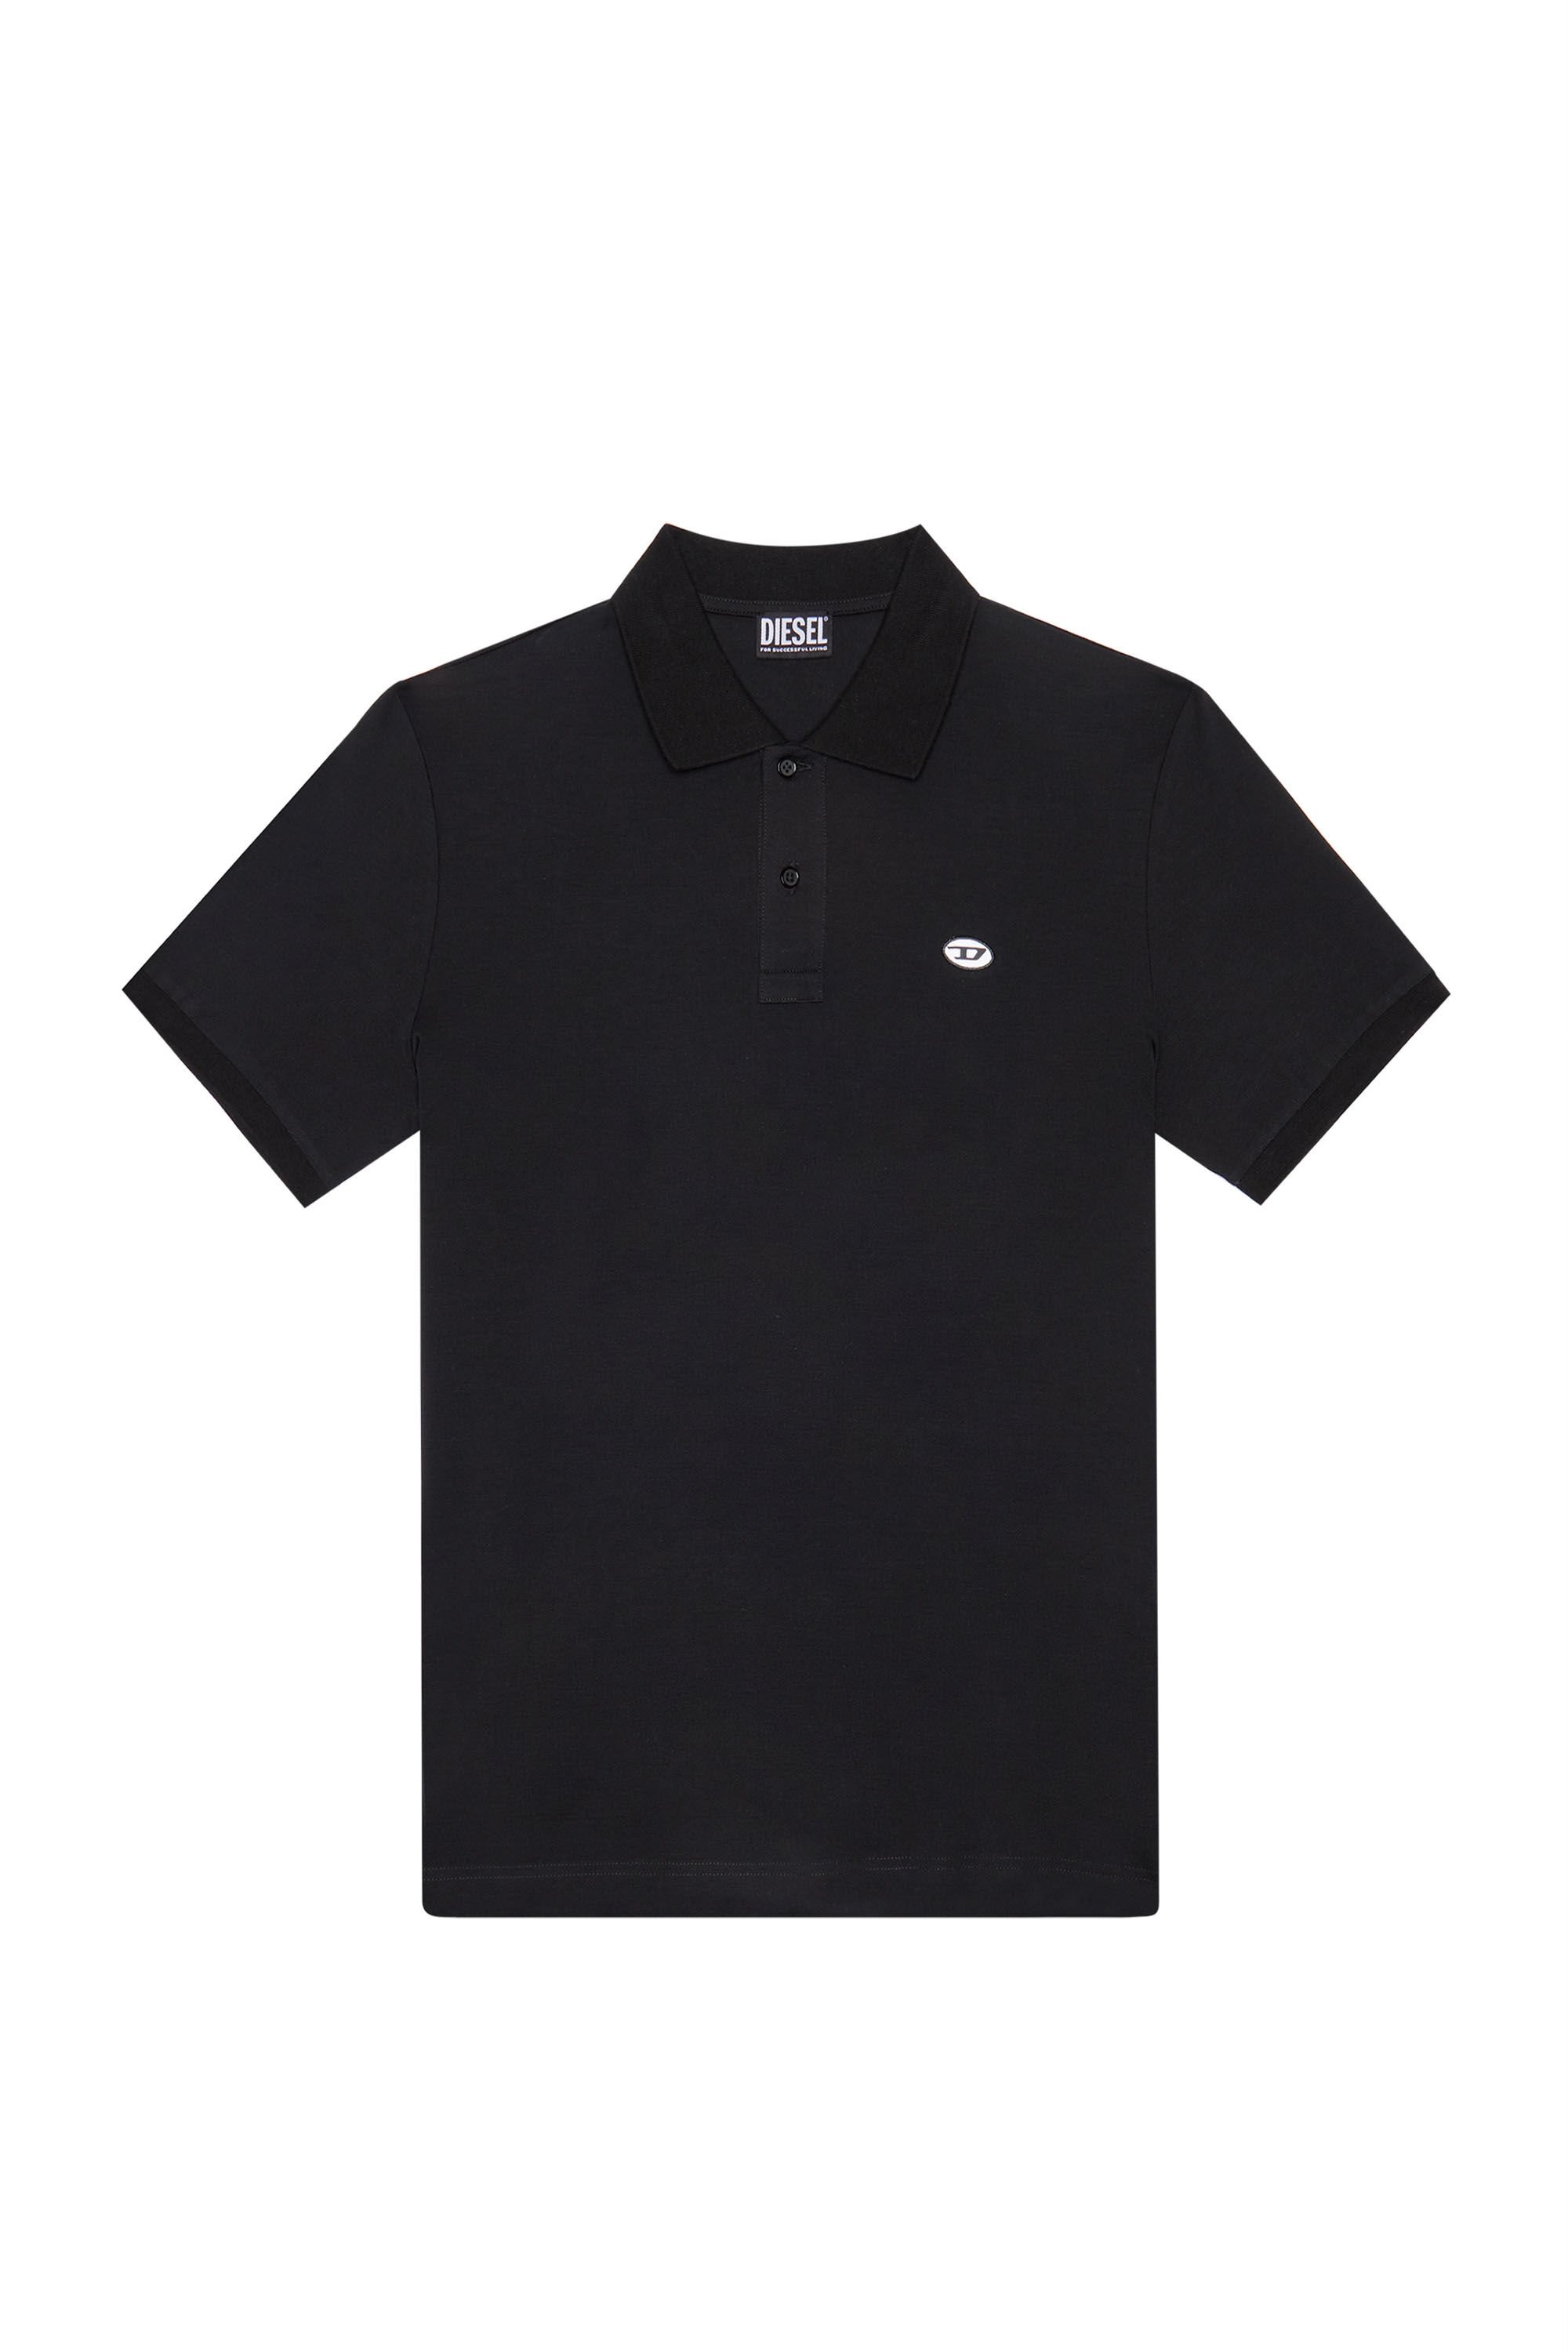 Diesel - T-SMITH-DOVAL-PJ, Man Polo shirt with oval D patch in Black - Image 2